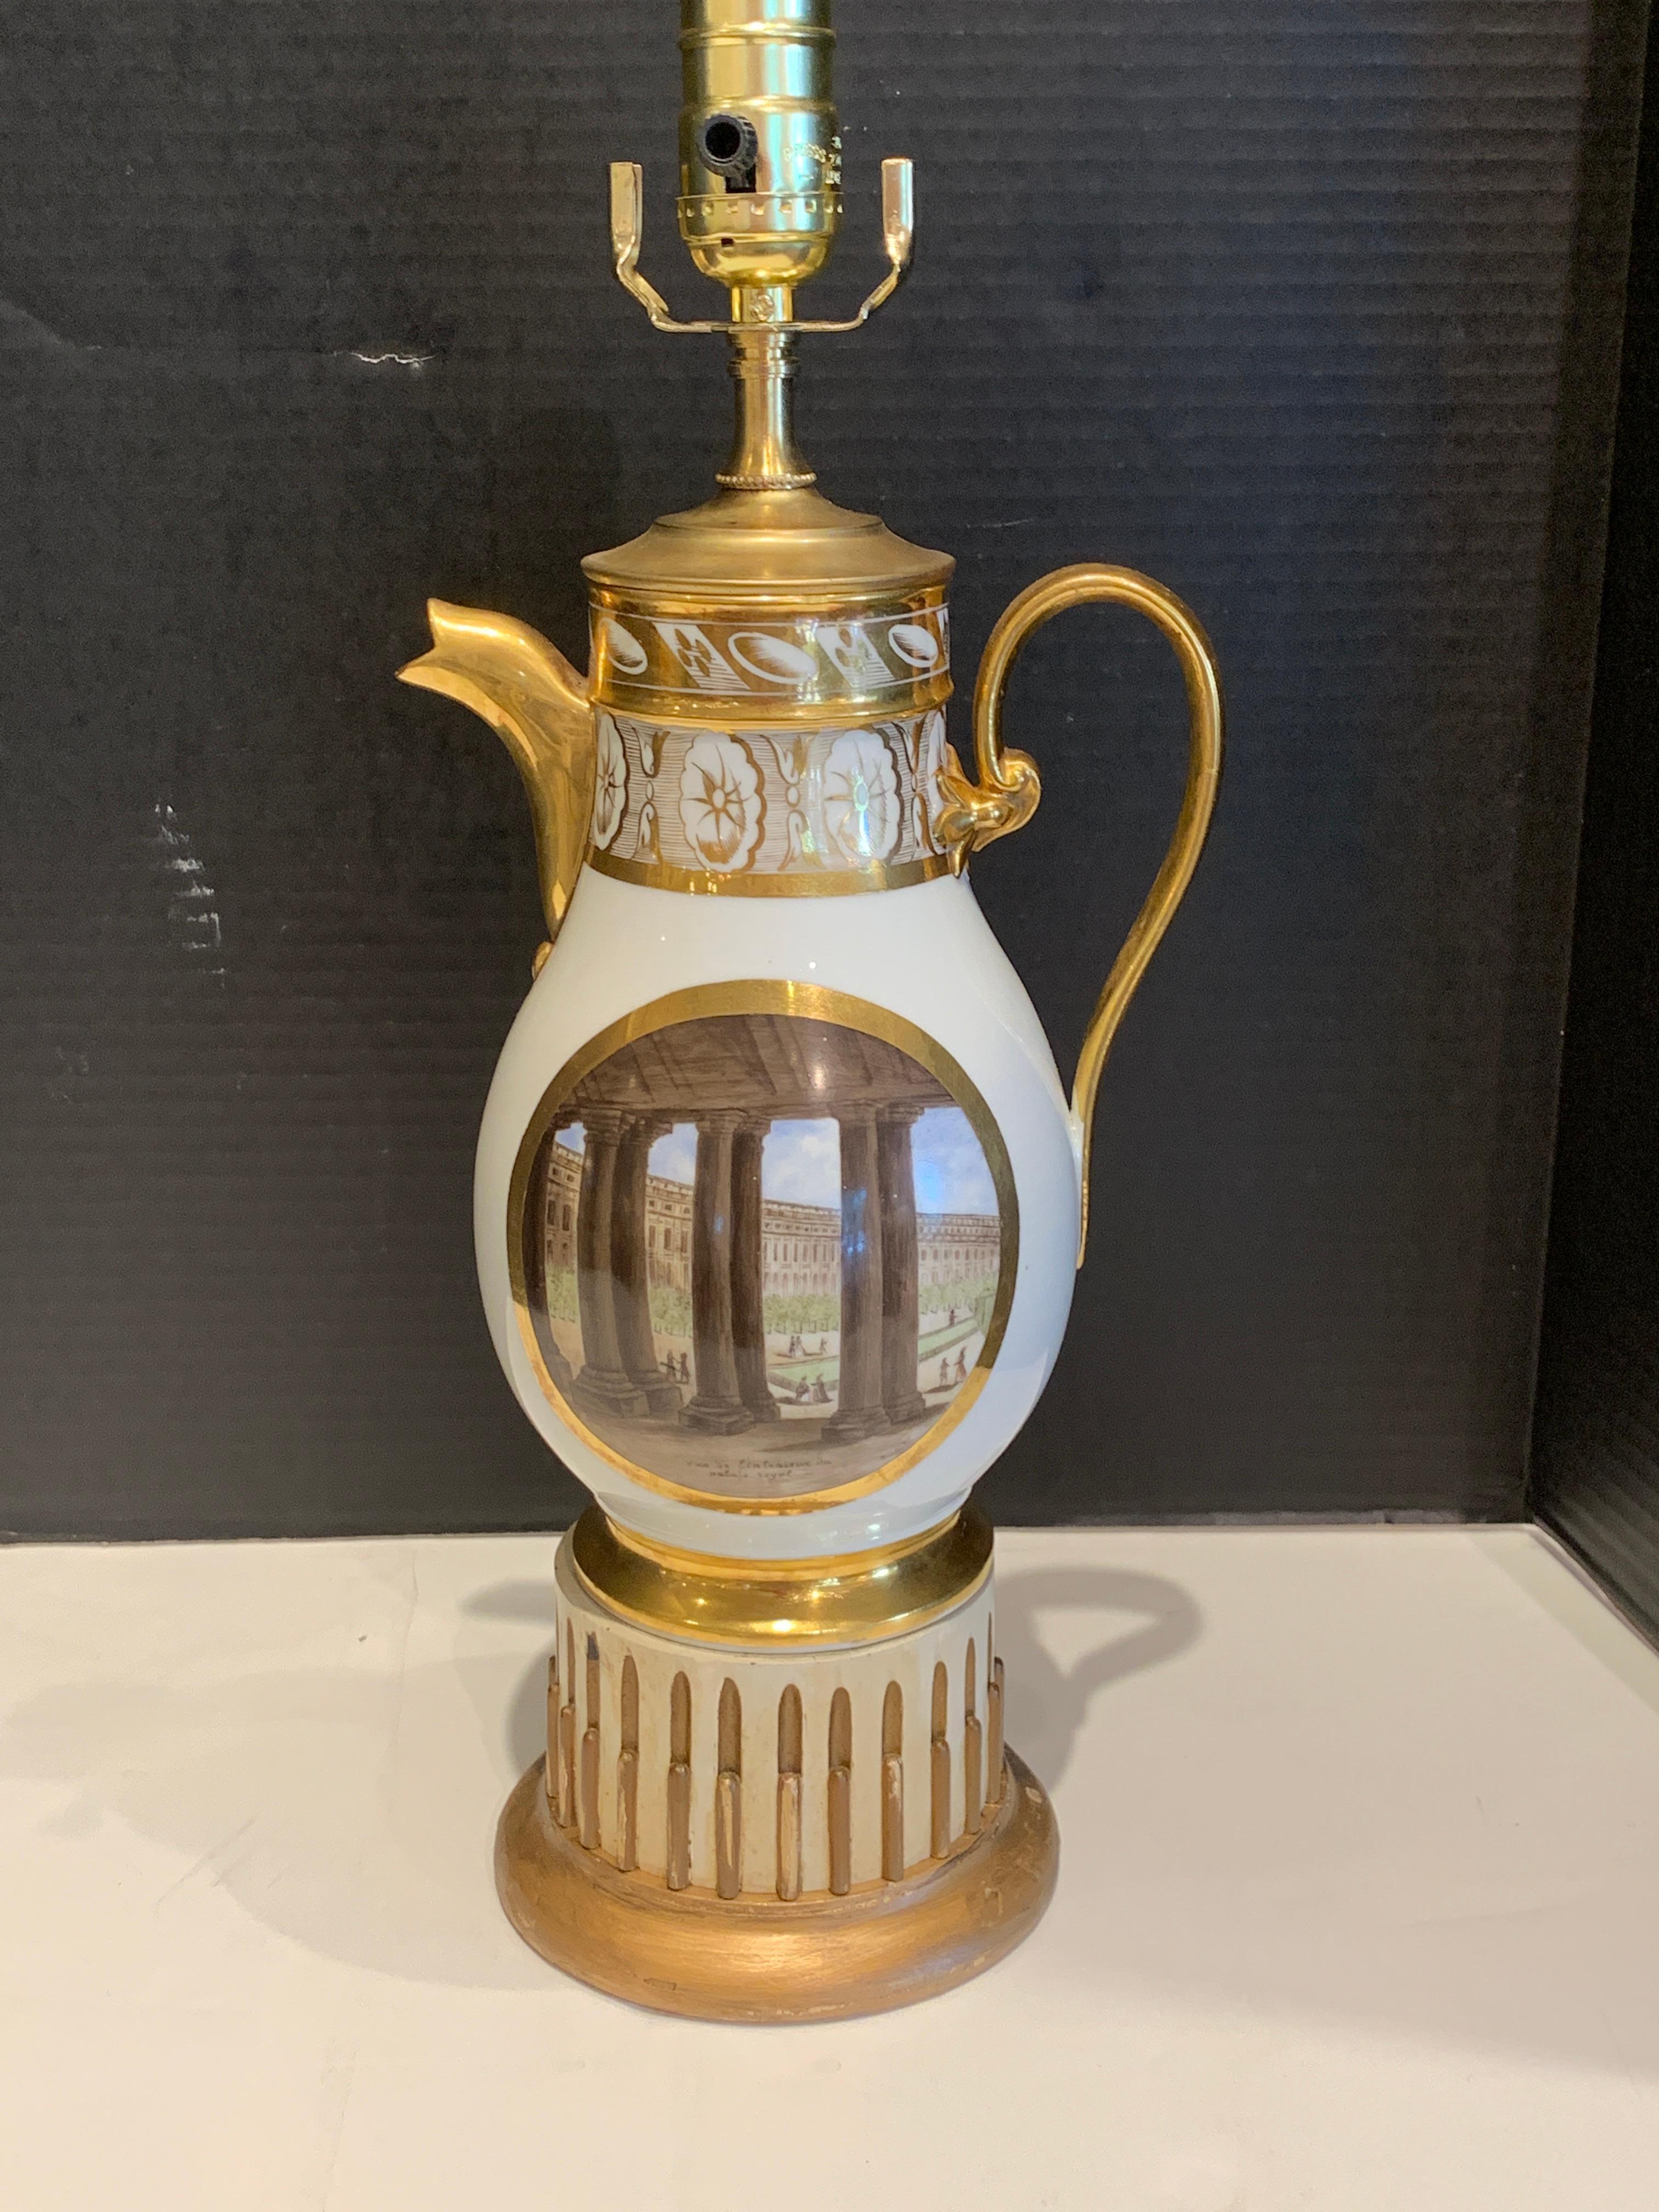 19th century Old Paris topographical coffee pot, now as a lamp
One side depicting a view of the of the Palais Royal the other side shows a view of the L’Arc Porte Saint- Denis, raised on a 5.5